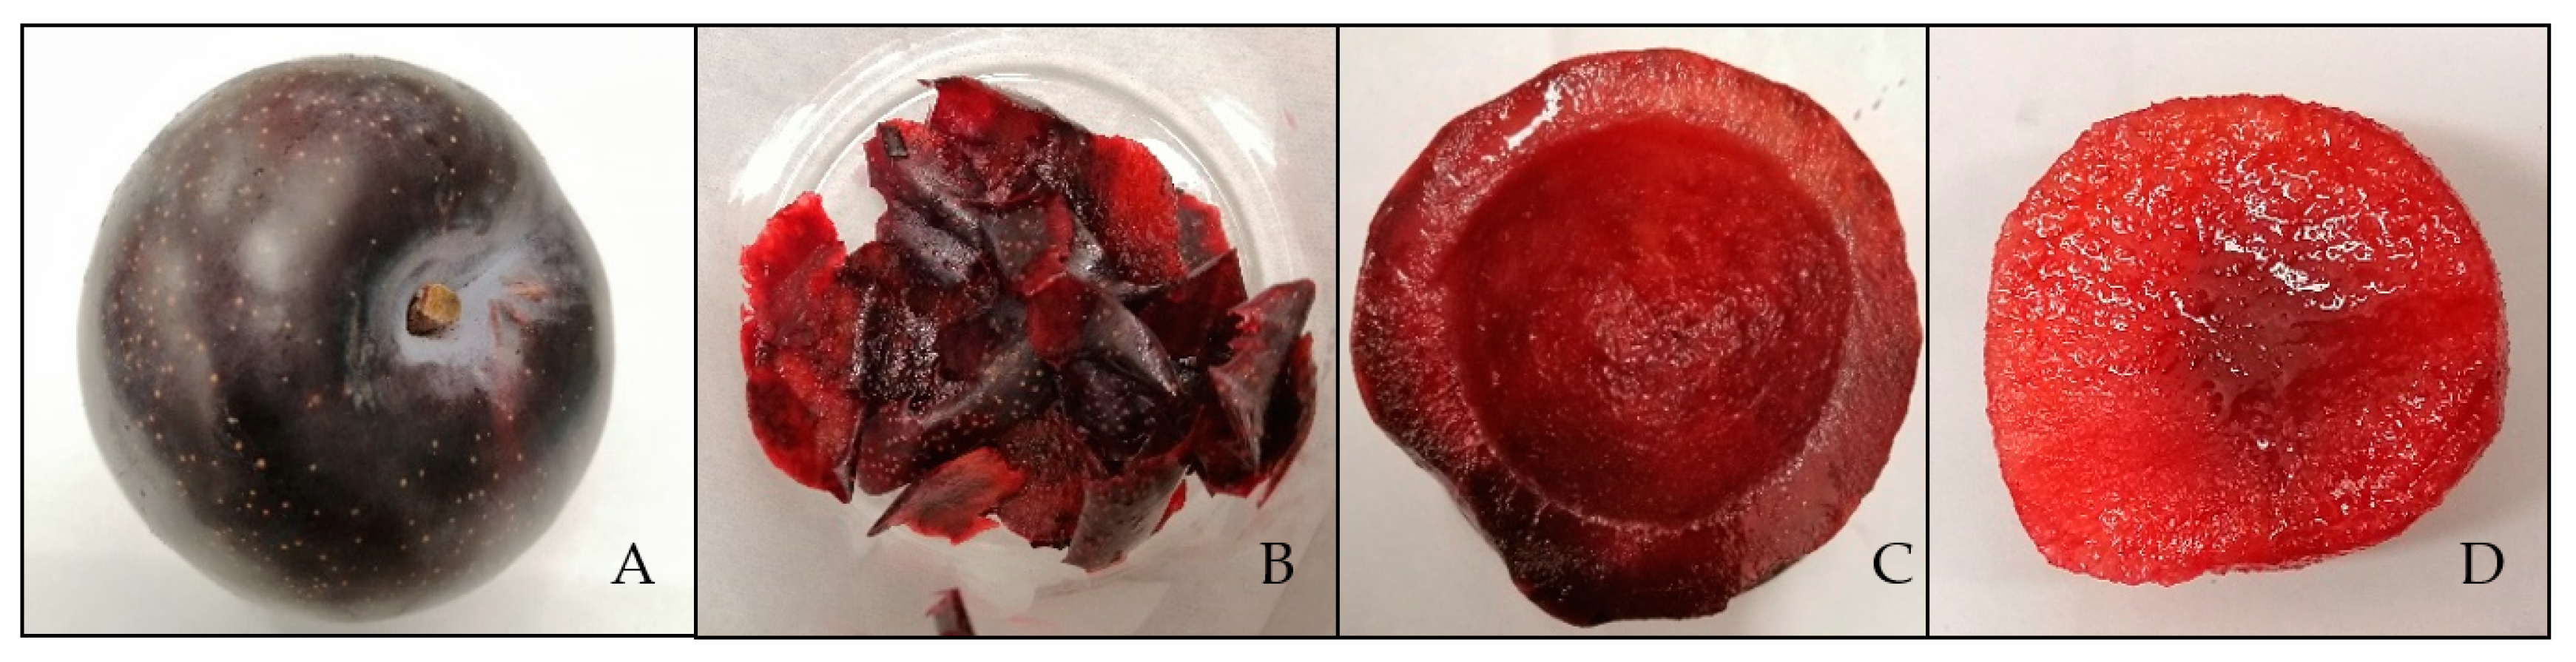 Foods | Free Full-Text | Effect of Storage on the Nutritional Quality of Queen  Garnet Plum